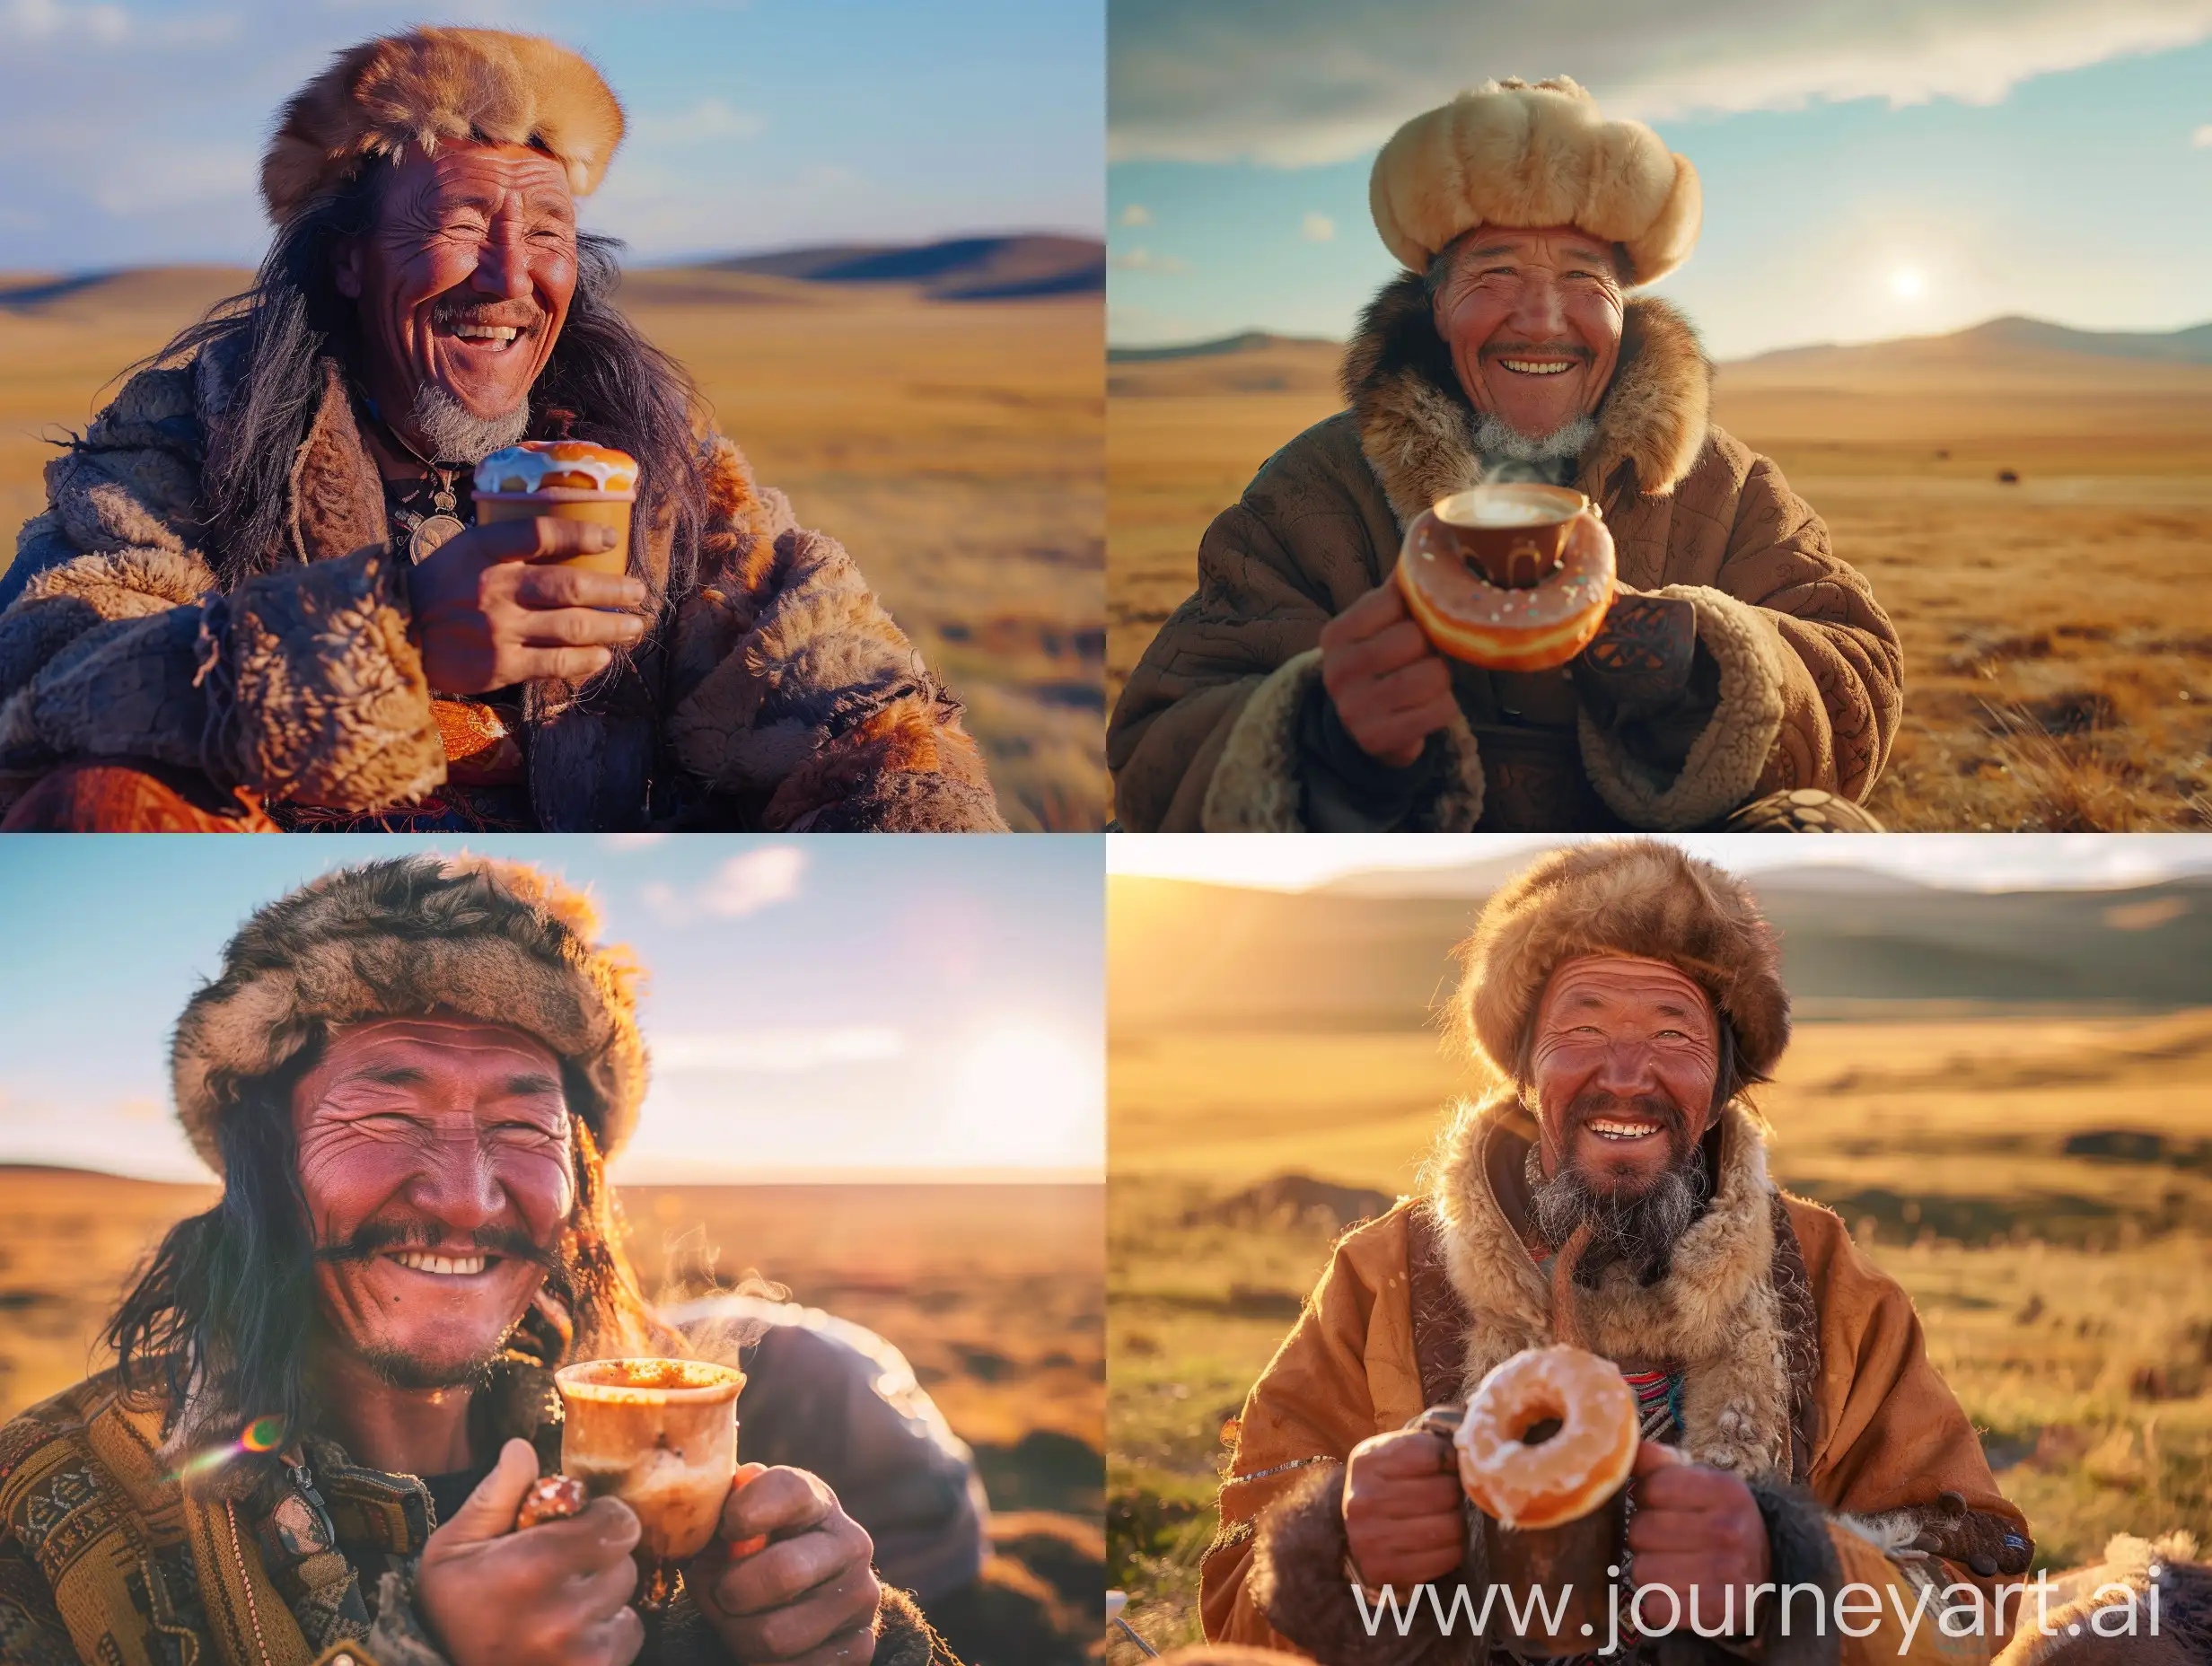 A happy mongolian shaman, very handsome, drinks hot coffee with a donut in the Mongolian steppe, sunlit, 8K